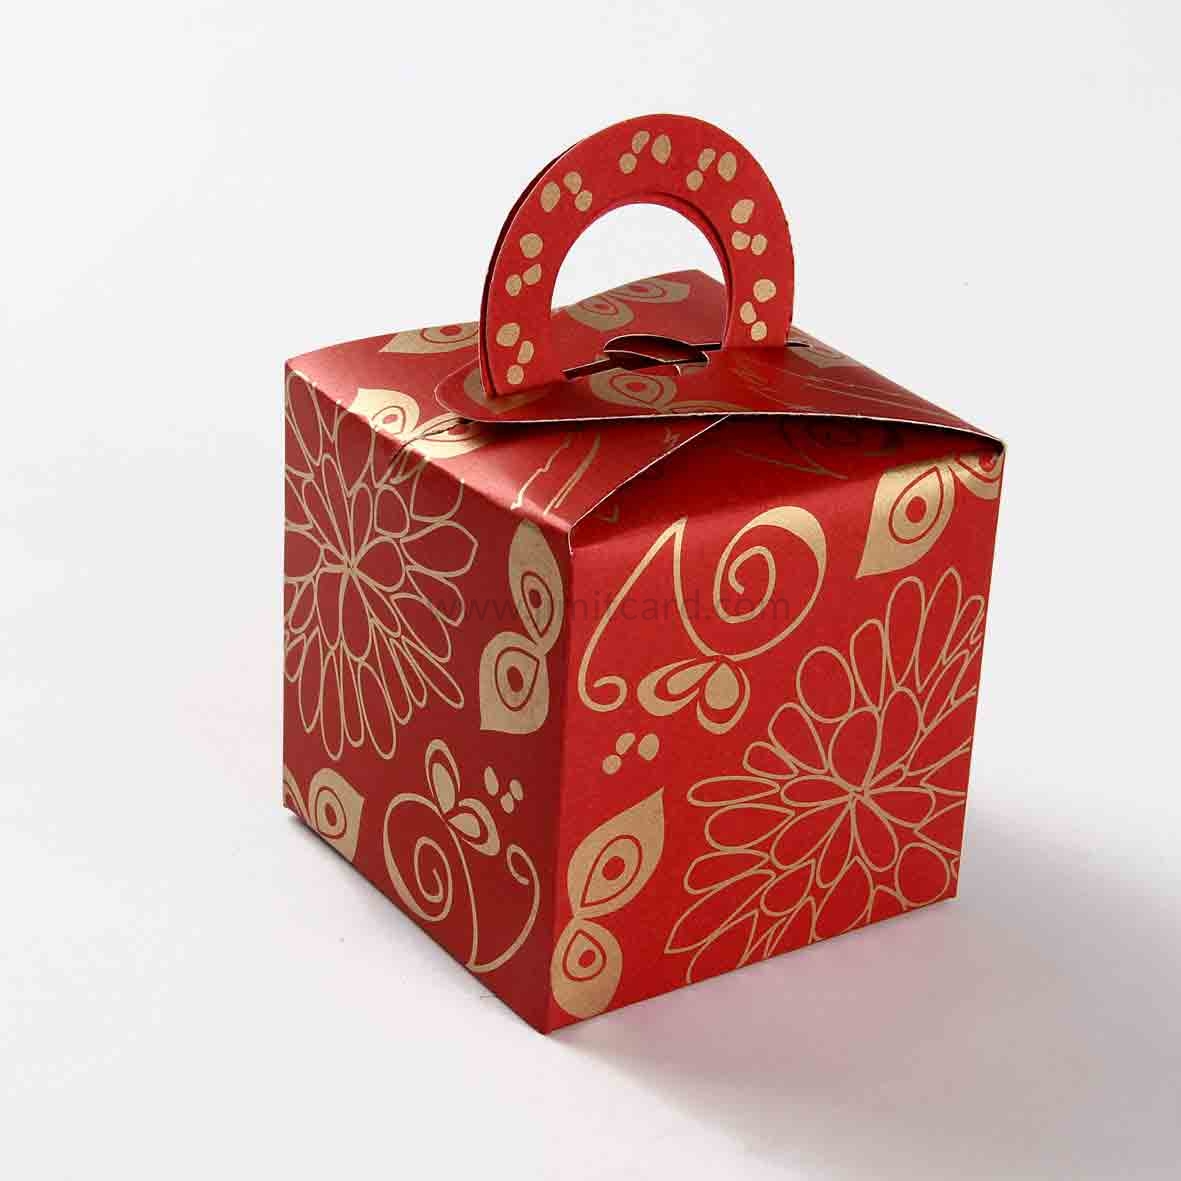 Square Wedding Party Favor Box in Red with a Holder